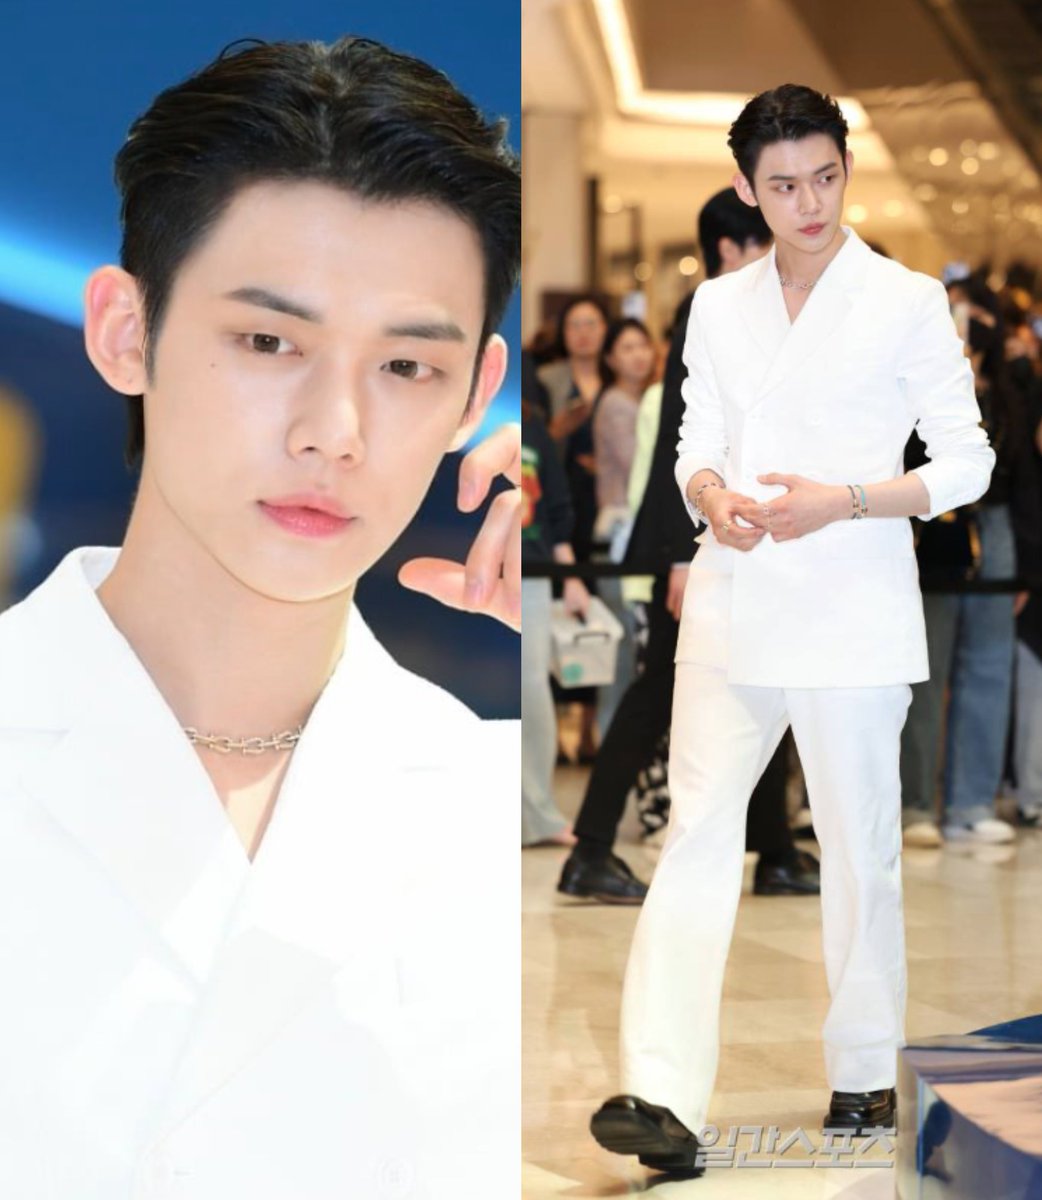 TXT's Yeonjun at Fred Jewelry event today.